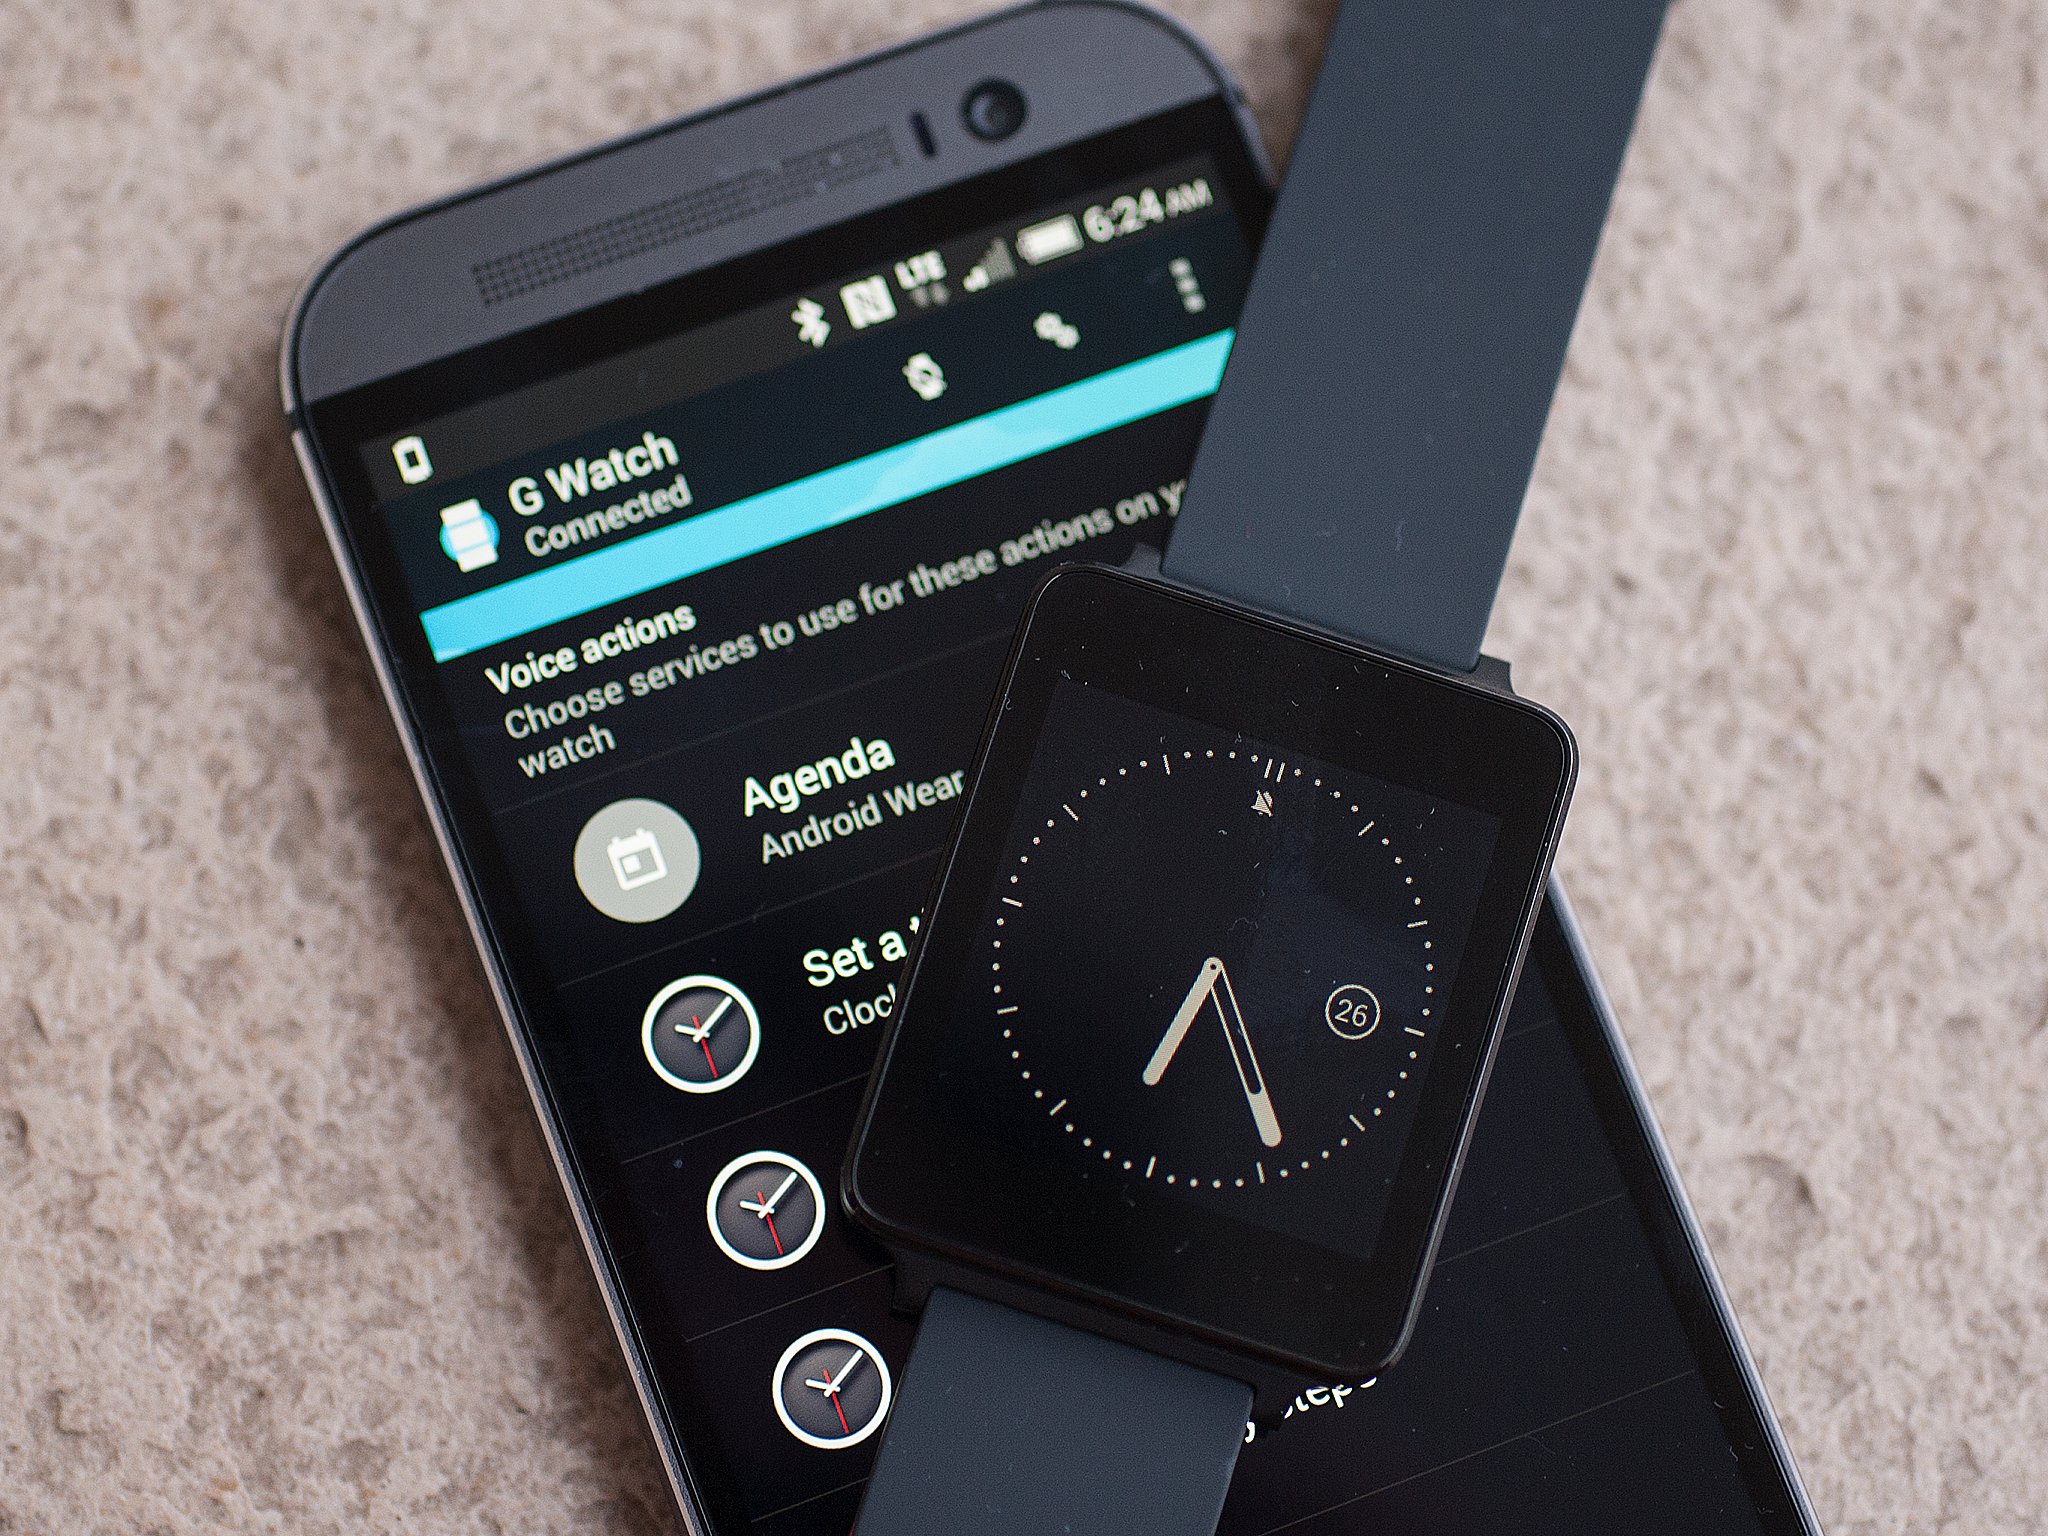 LG G Watch, Android Wear app